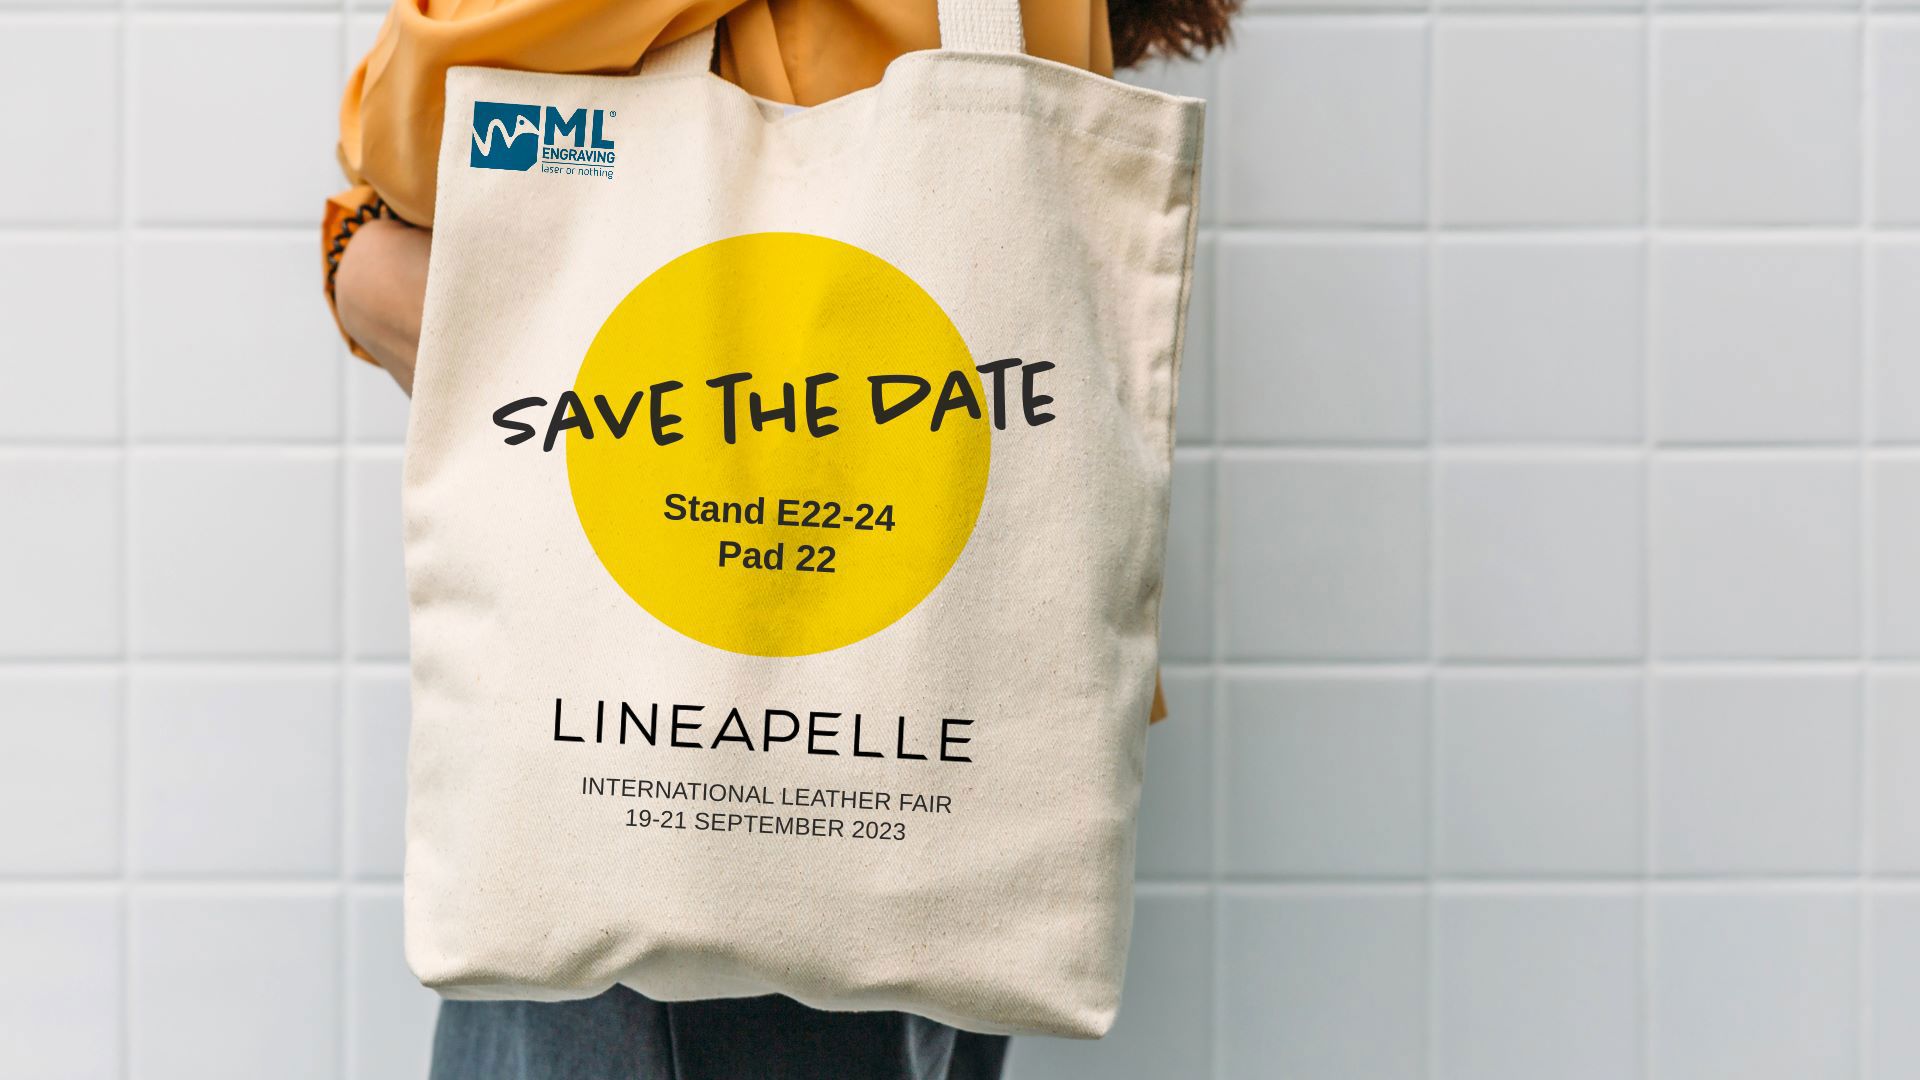 Let's meet at Lineapelle